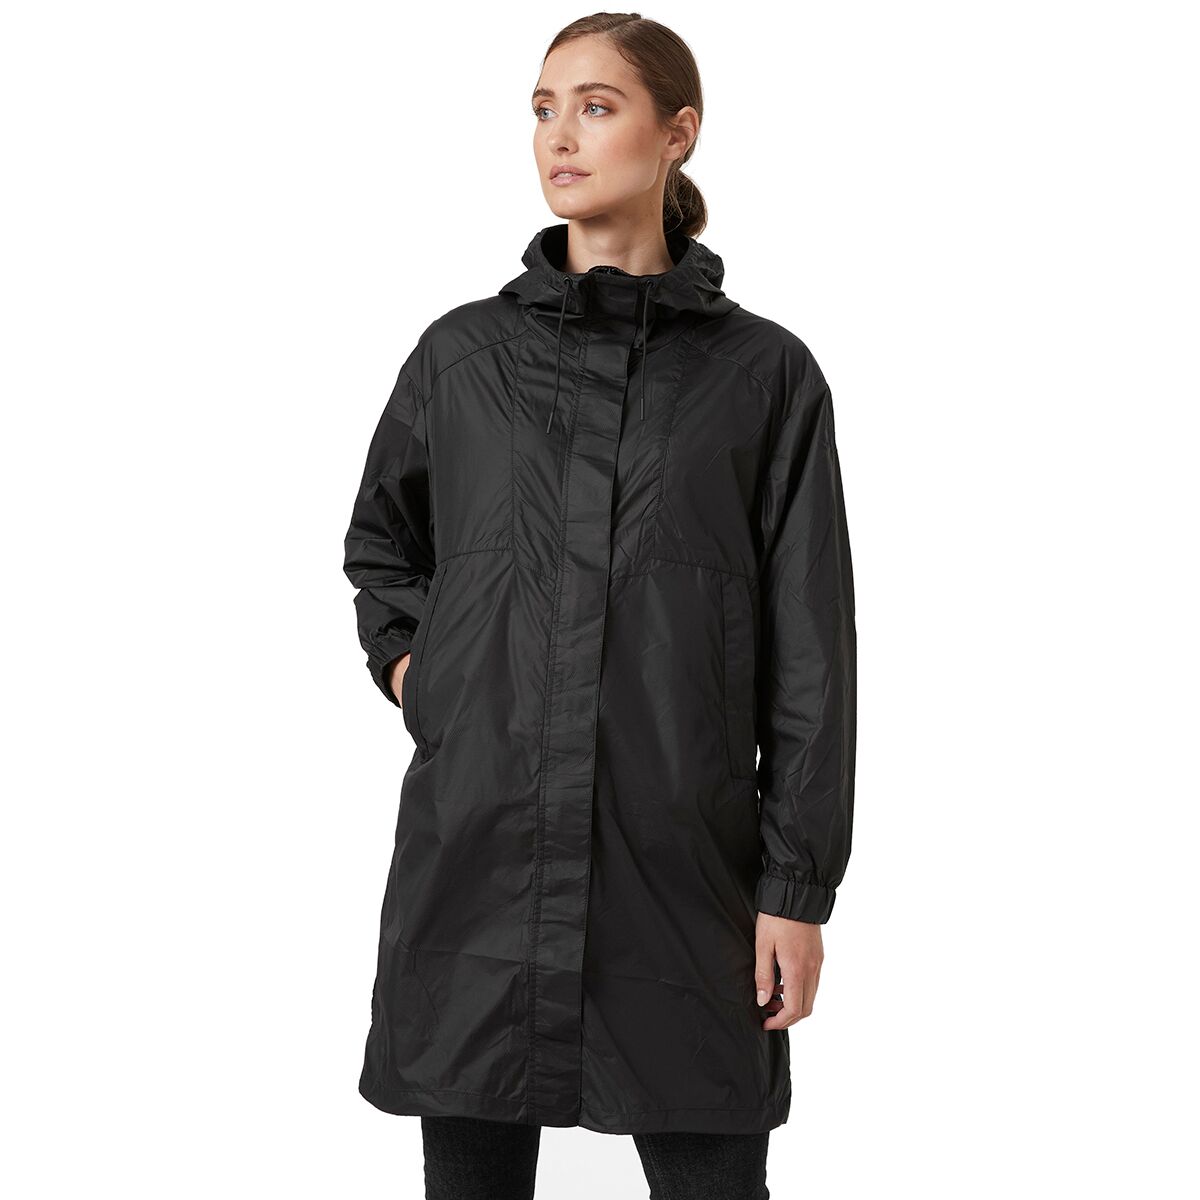 Helly Hansen - Women's Jackets, Coats, Parkas. Sustainable fashion and ...